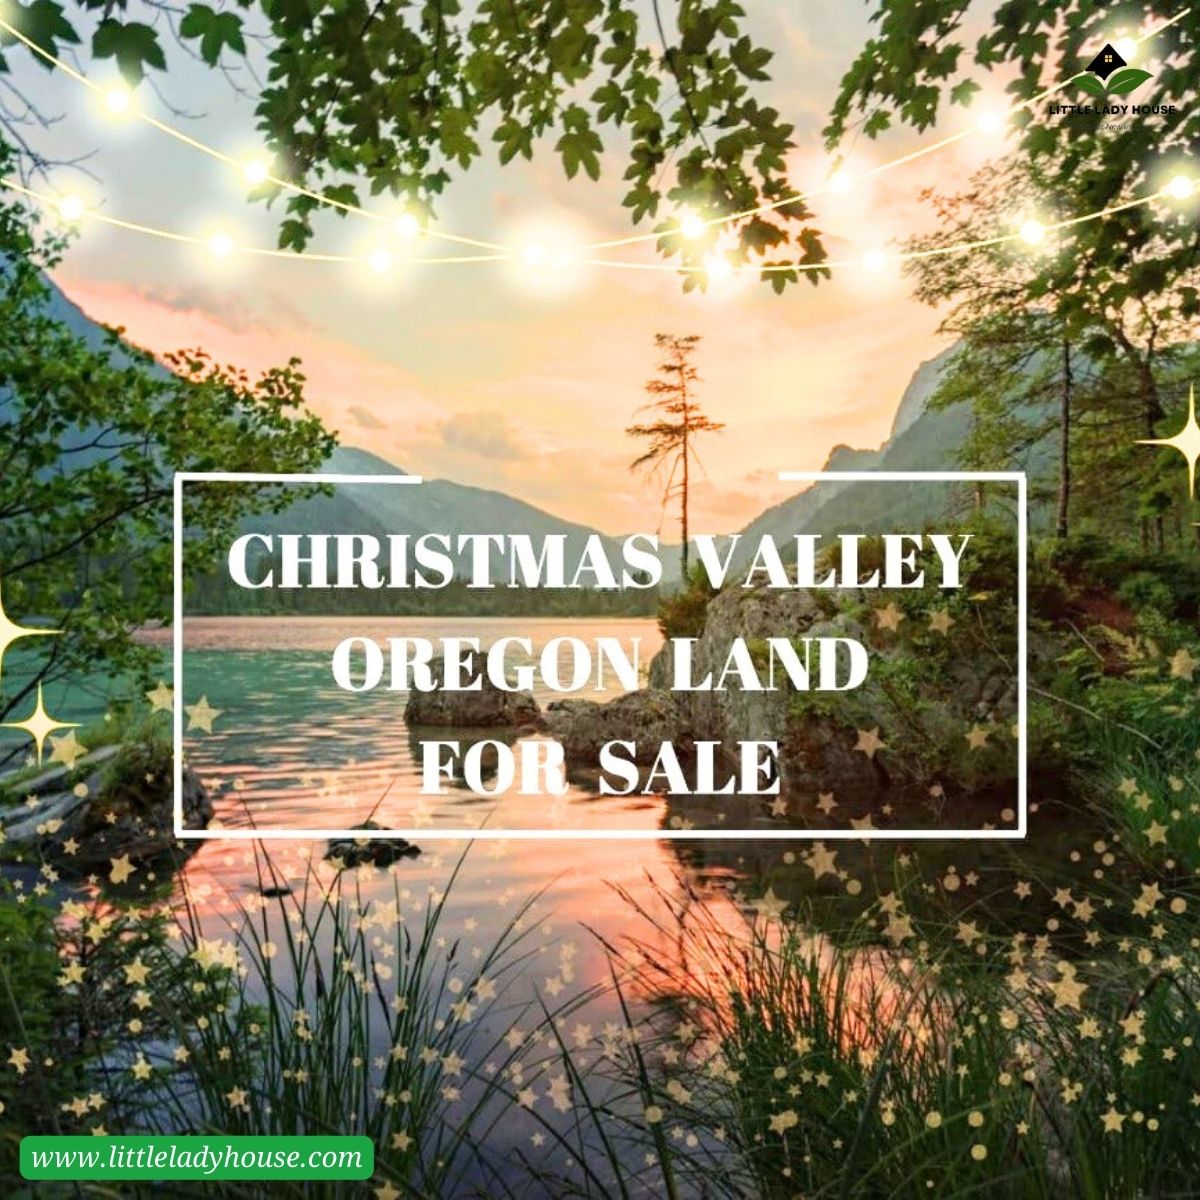 The allure of Christmas Valley Oregon land for sale